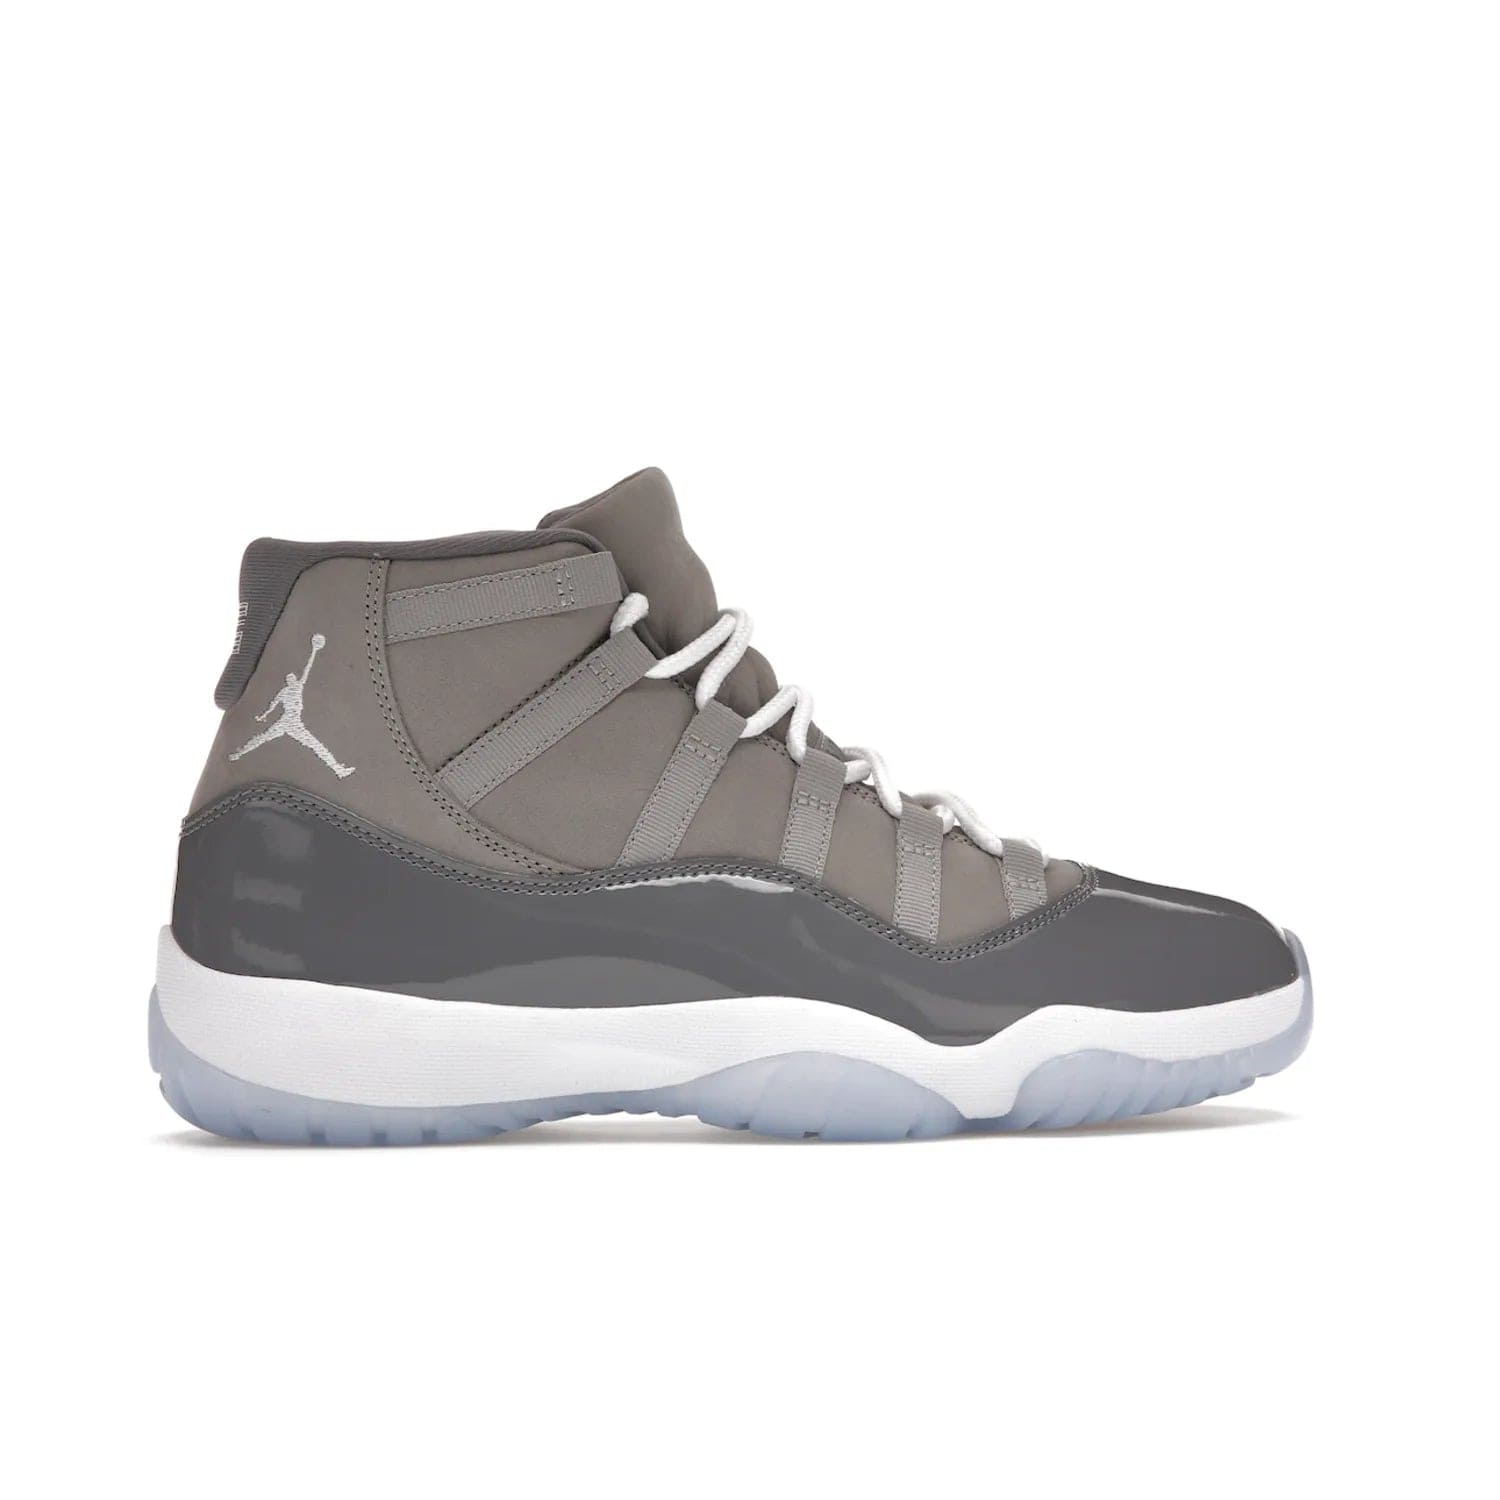 Jordan 11 Retro Cool Grey (2021) - Image 36 - Only at www.BallersClubKickz.com - Shop the Air Jordan 11 Retro Cool Grey (2021) for a must-have sneaker with a Cool Grey Durabuck upper, patent leather overlays, signature Jumpman embroidery, a white midsole, icy blue translucent outsole, and Multi-Color accents.  Released in December 2021 for $225.